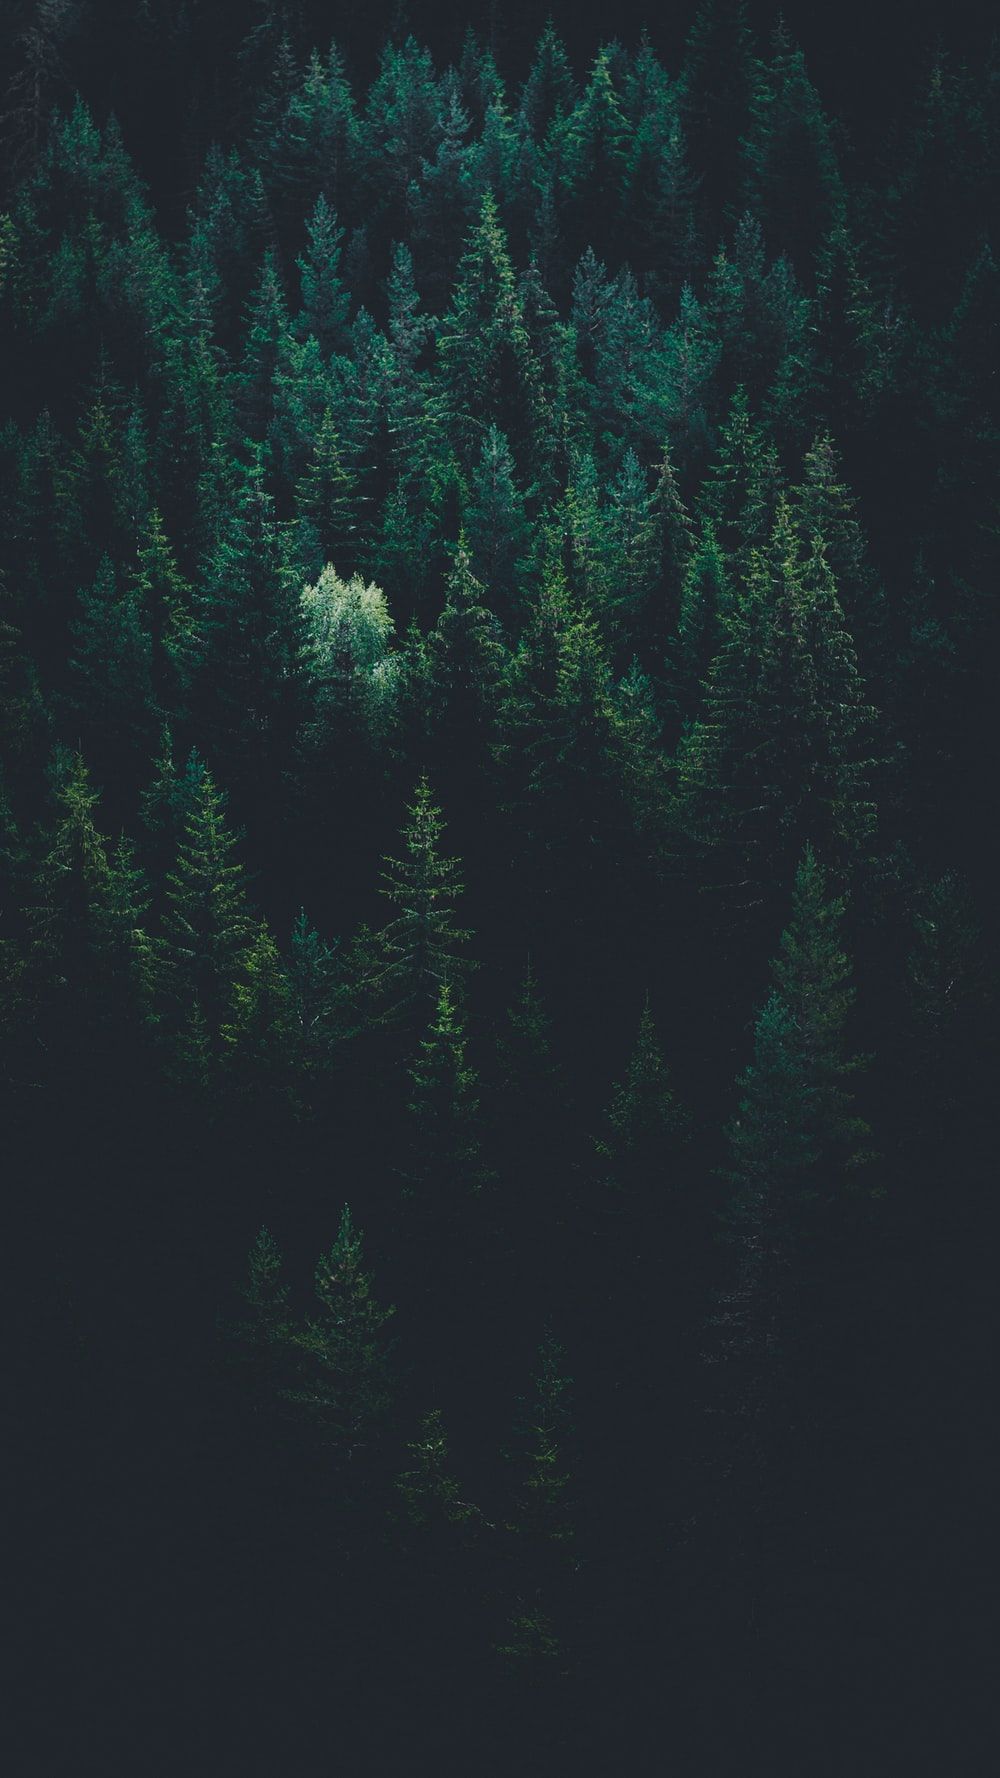 Lone Tent in the Lush Forest Minimalist Wallpaper, HD Minimalist 4K  Wallpapers, Images and Background - Wallpapers Den